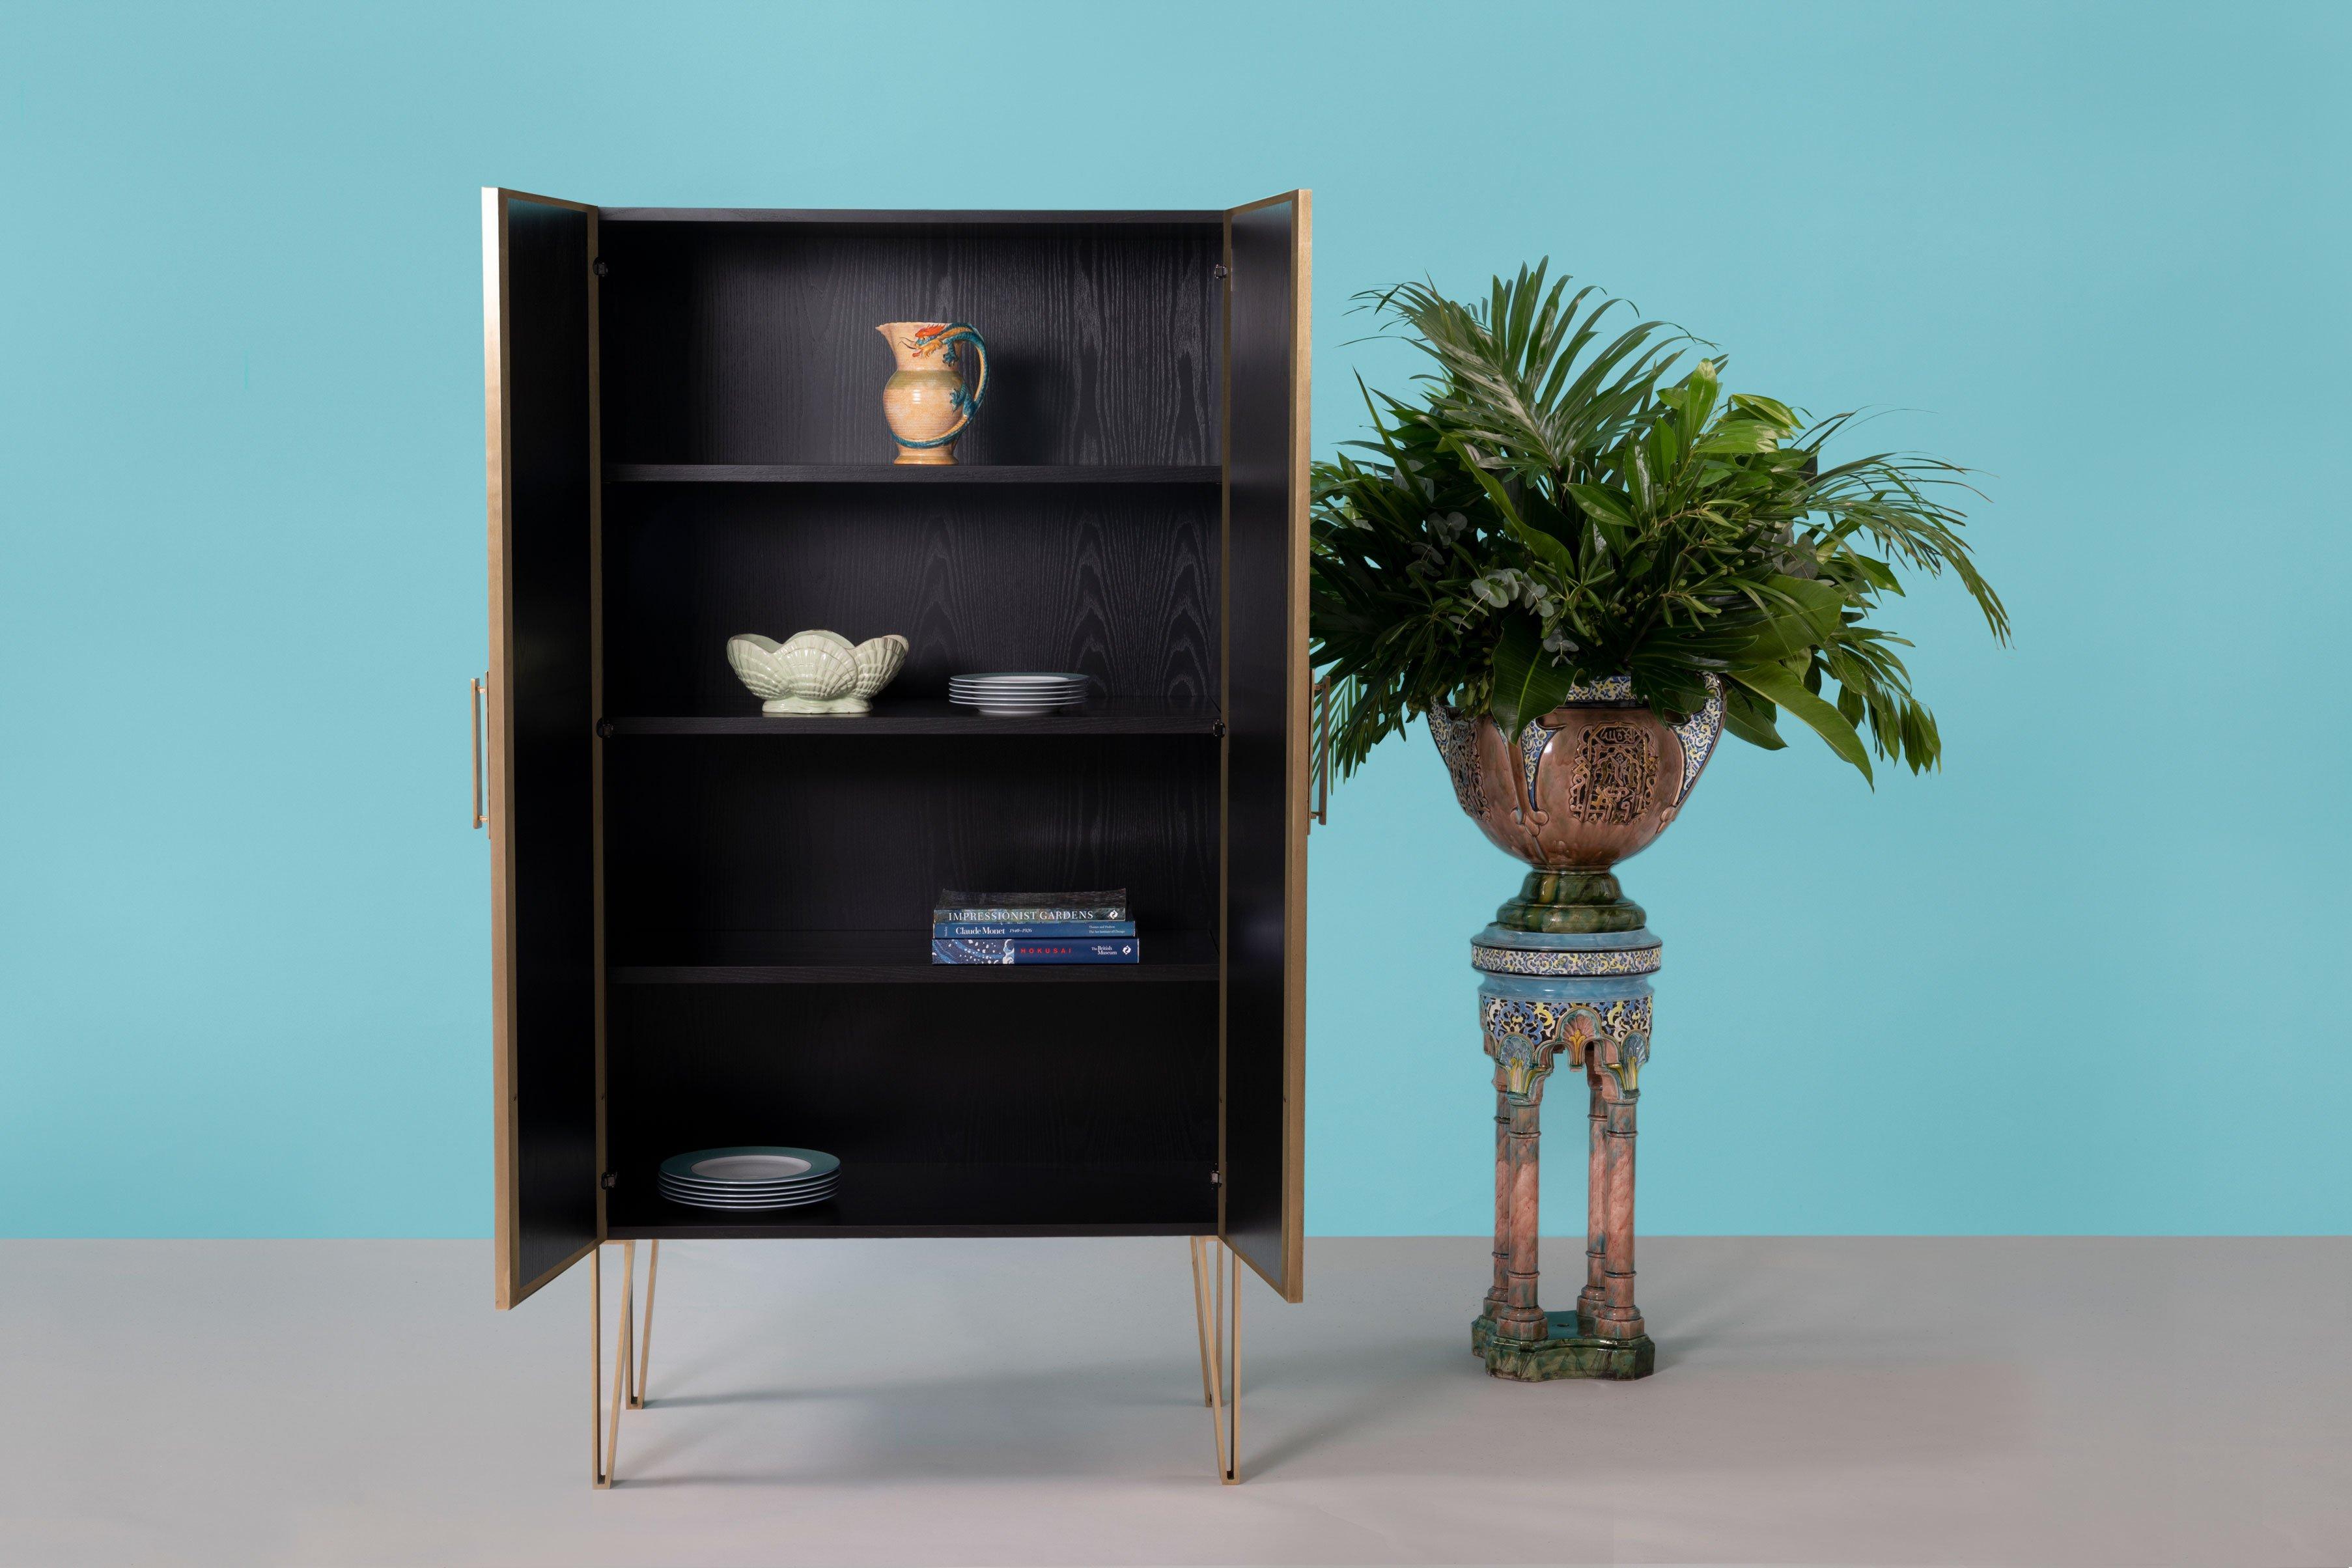 Showcasing Amy Molyneaux’s vibrant Deadly Nightshade print, the Cordelia cabinet is a bold, confident choice for any interior.

Handcrafted in England from lacquered oak wood, this statement piece is fine upholstered in sumptuous silk-blend satin